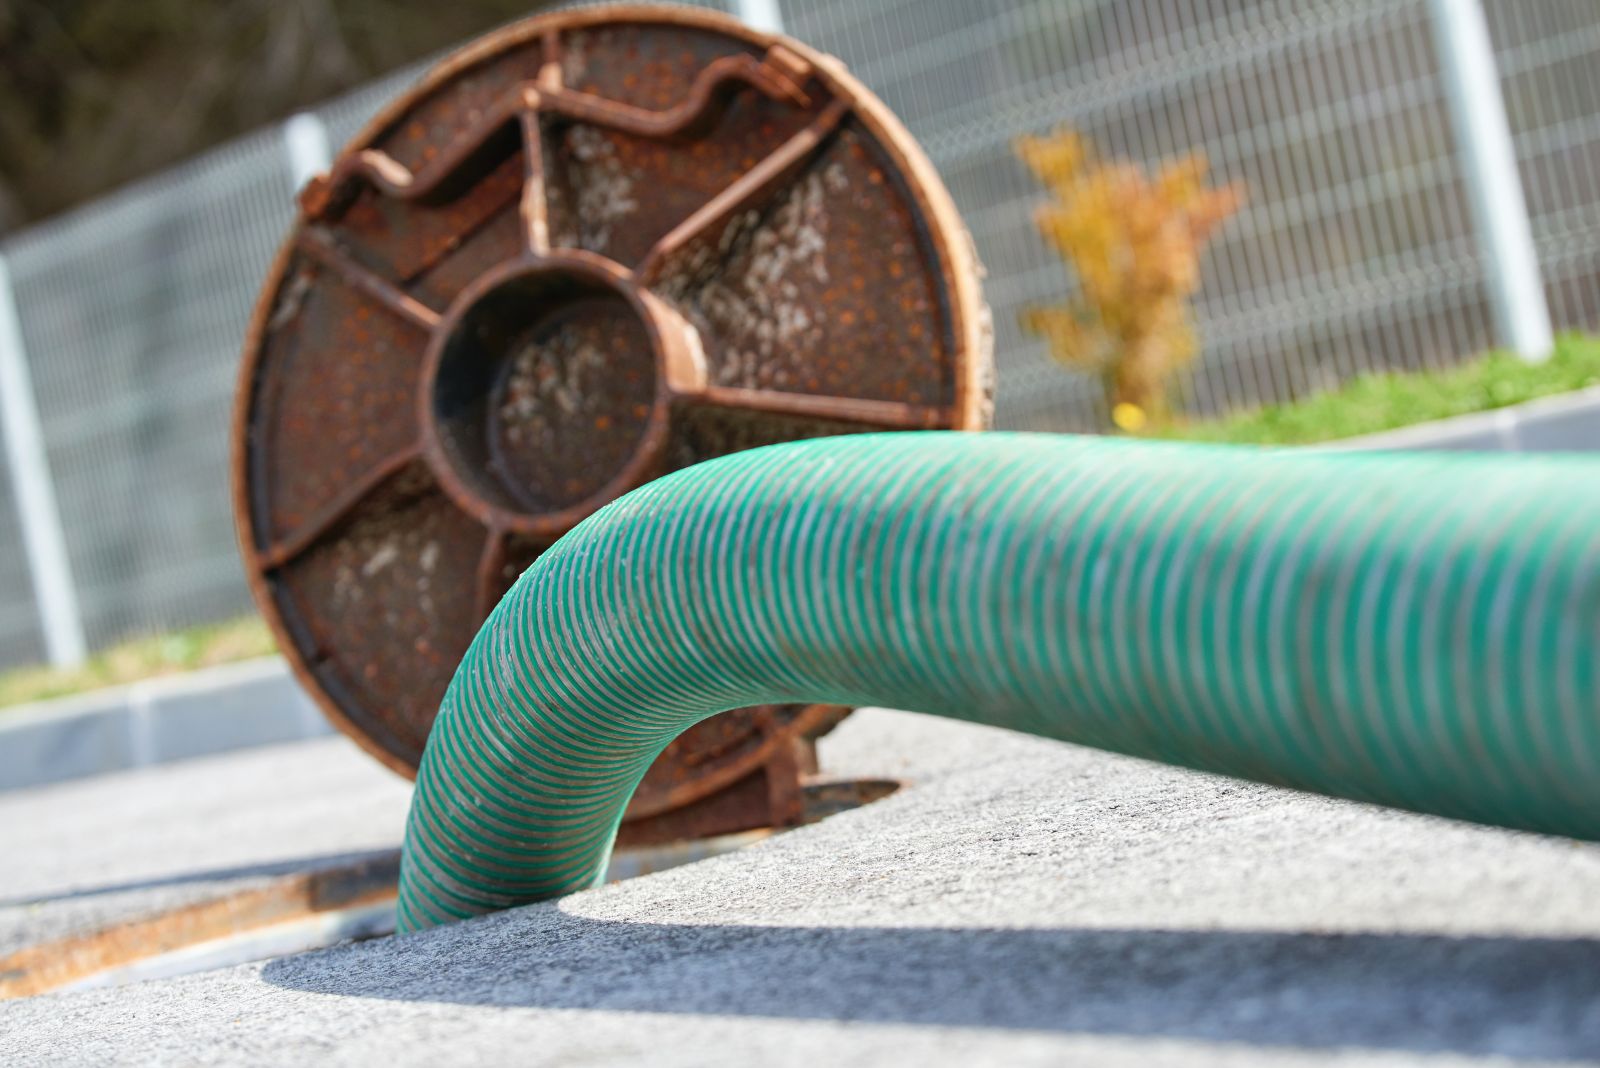 Sewage Cleanup Essentials: Protecting Your Home and Health